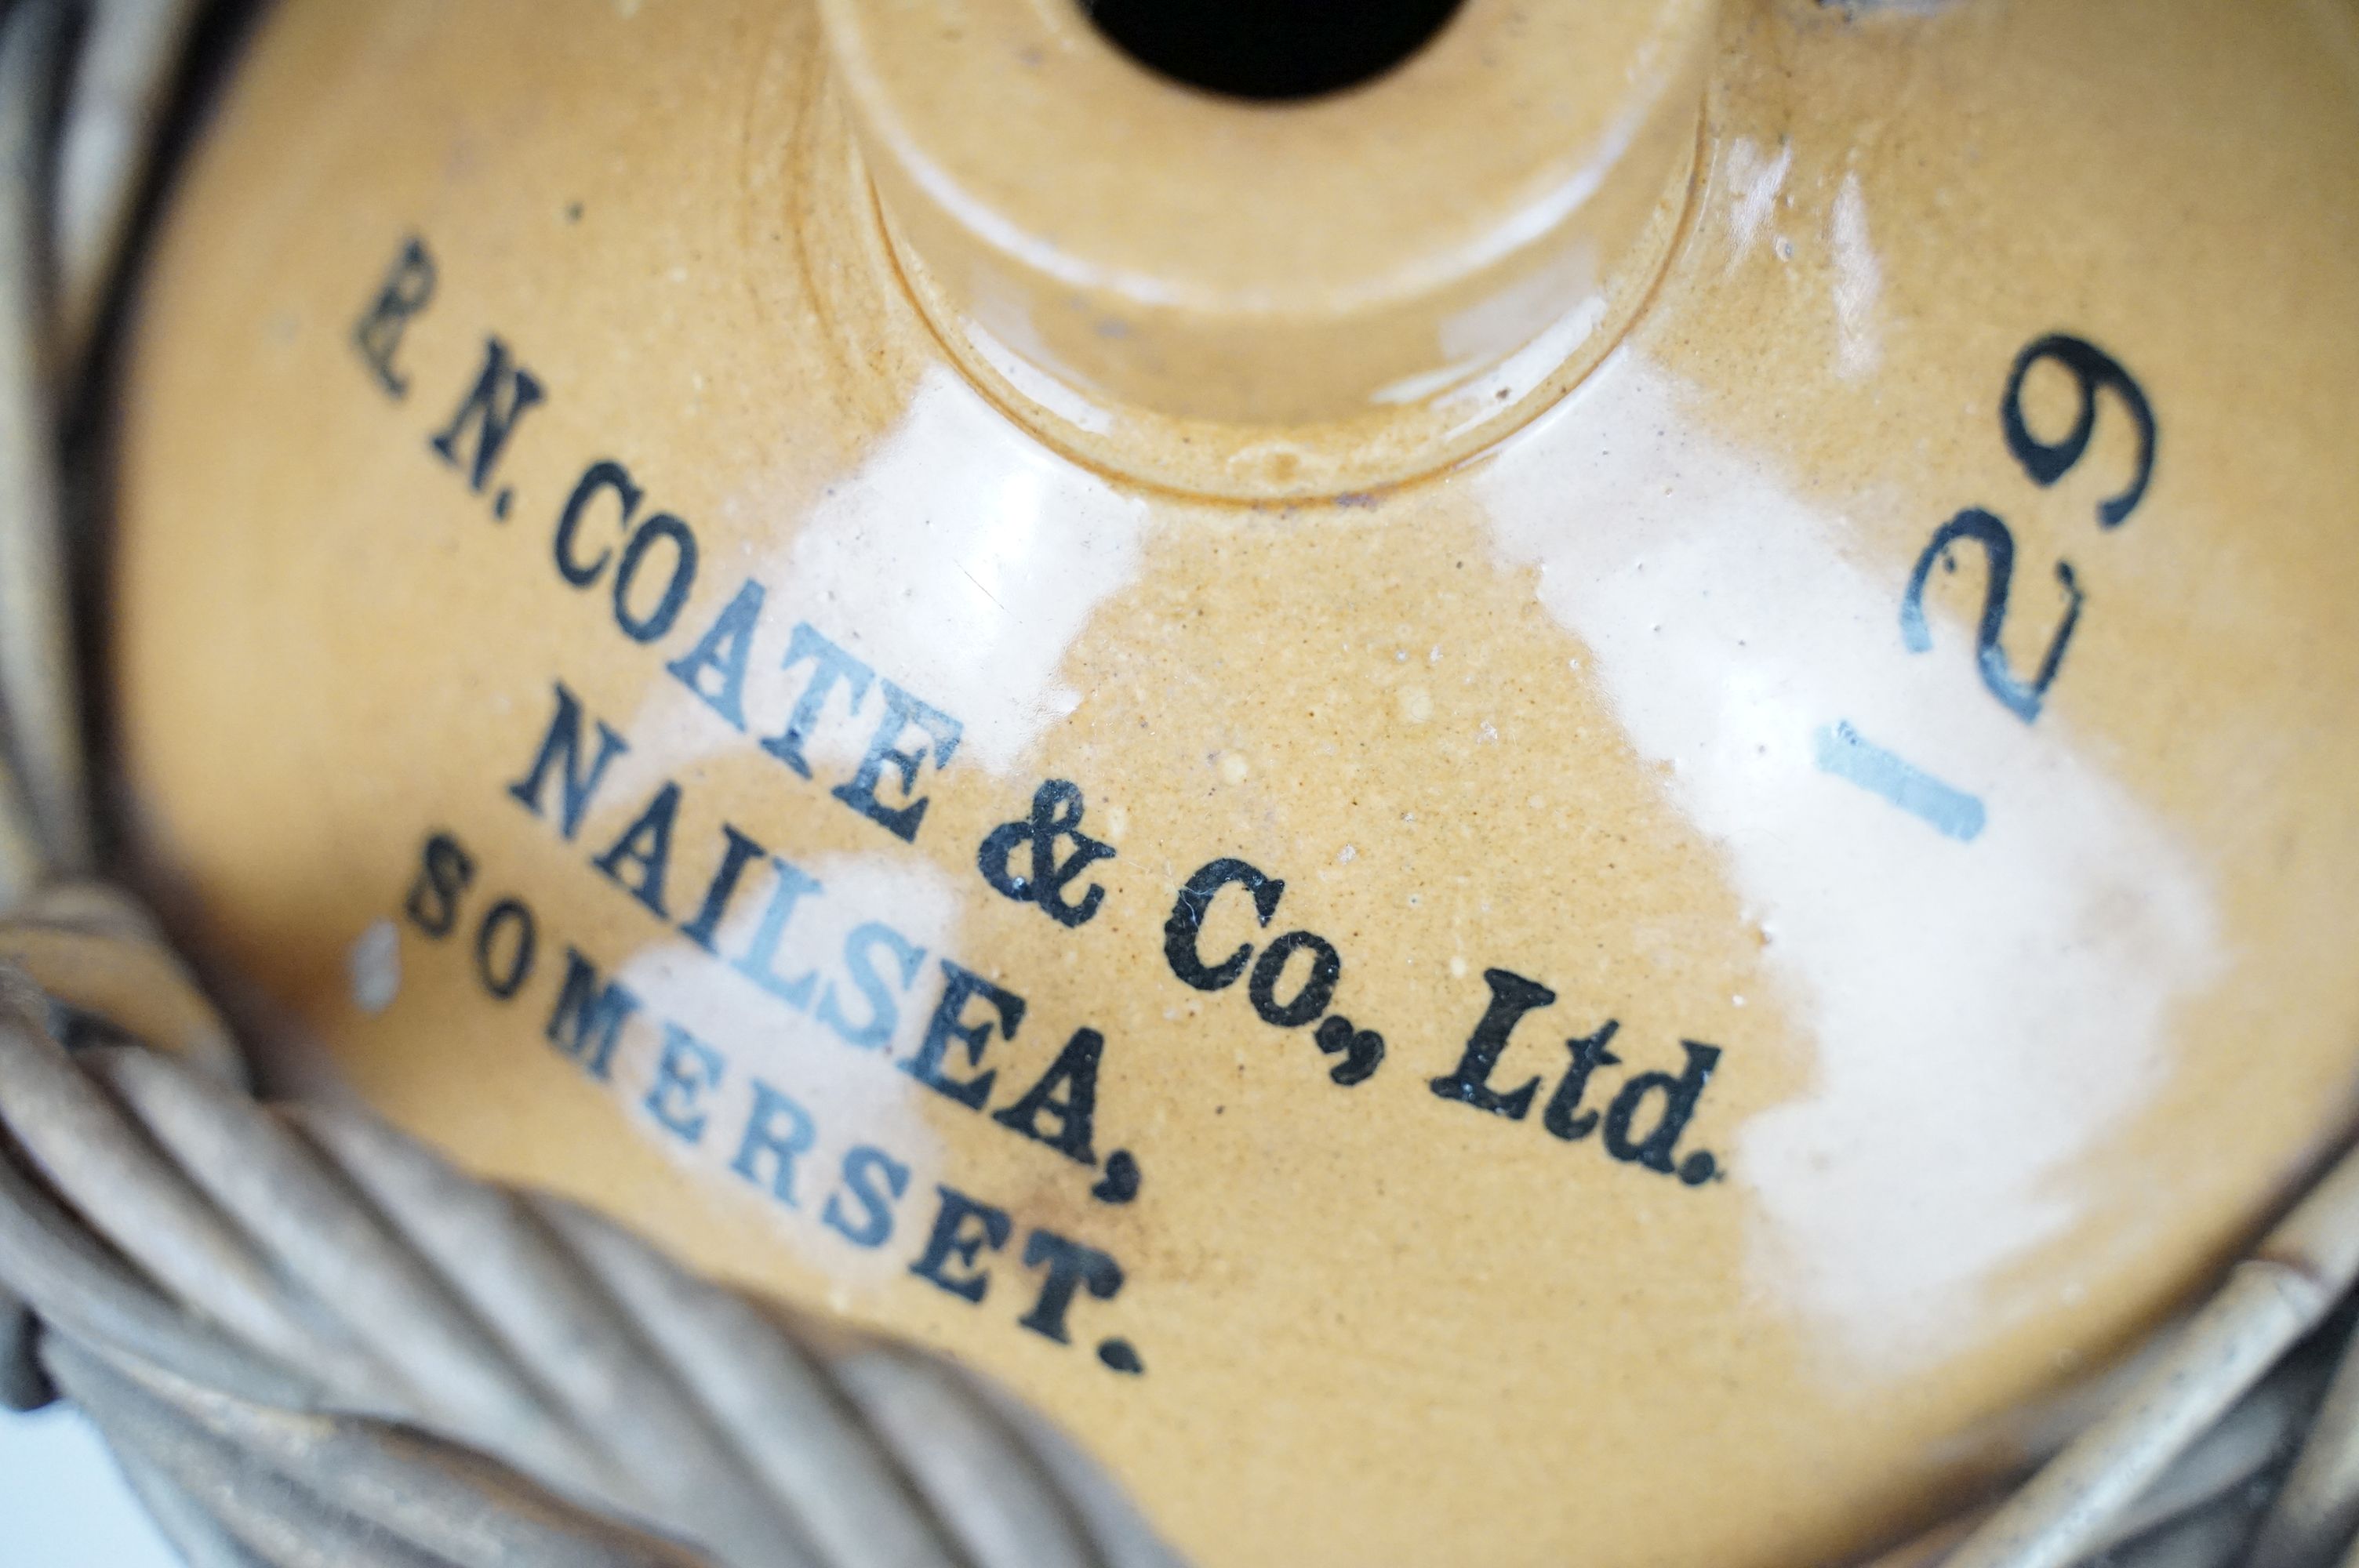 R.N. Coate & Co Ltd of Nailsea, Somerset - A stoneware cider flagon housed within a wicker - Image 4 of 10